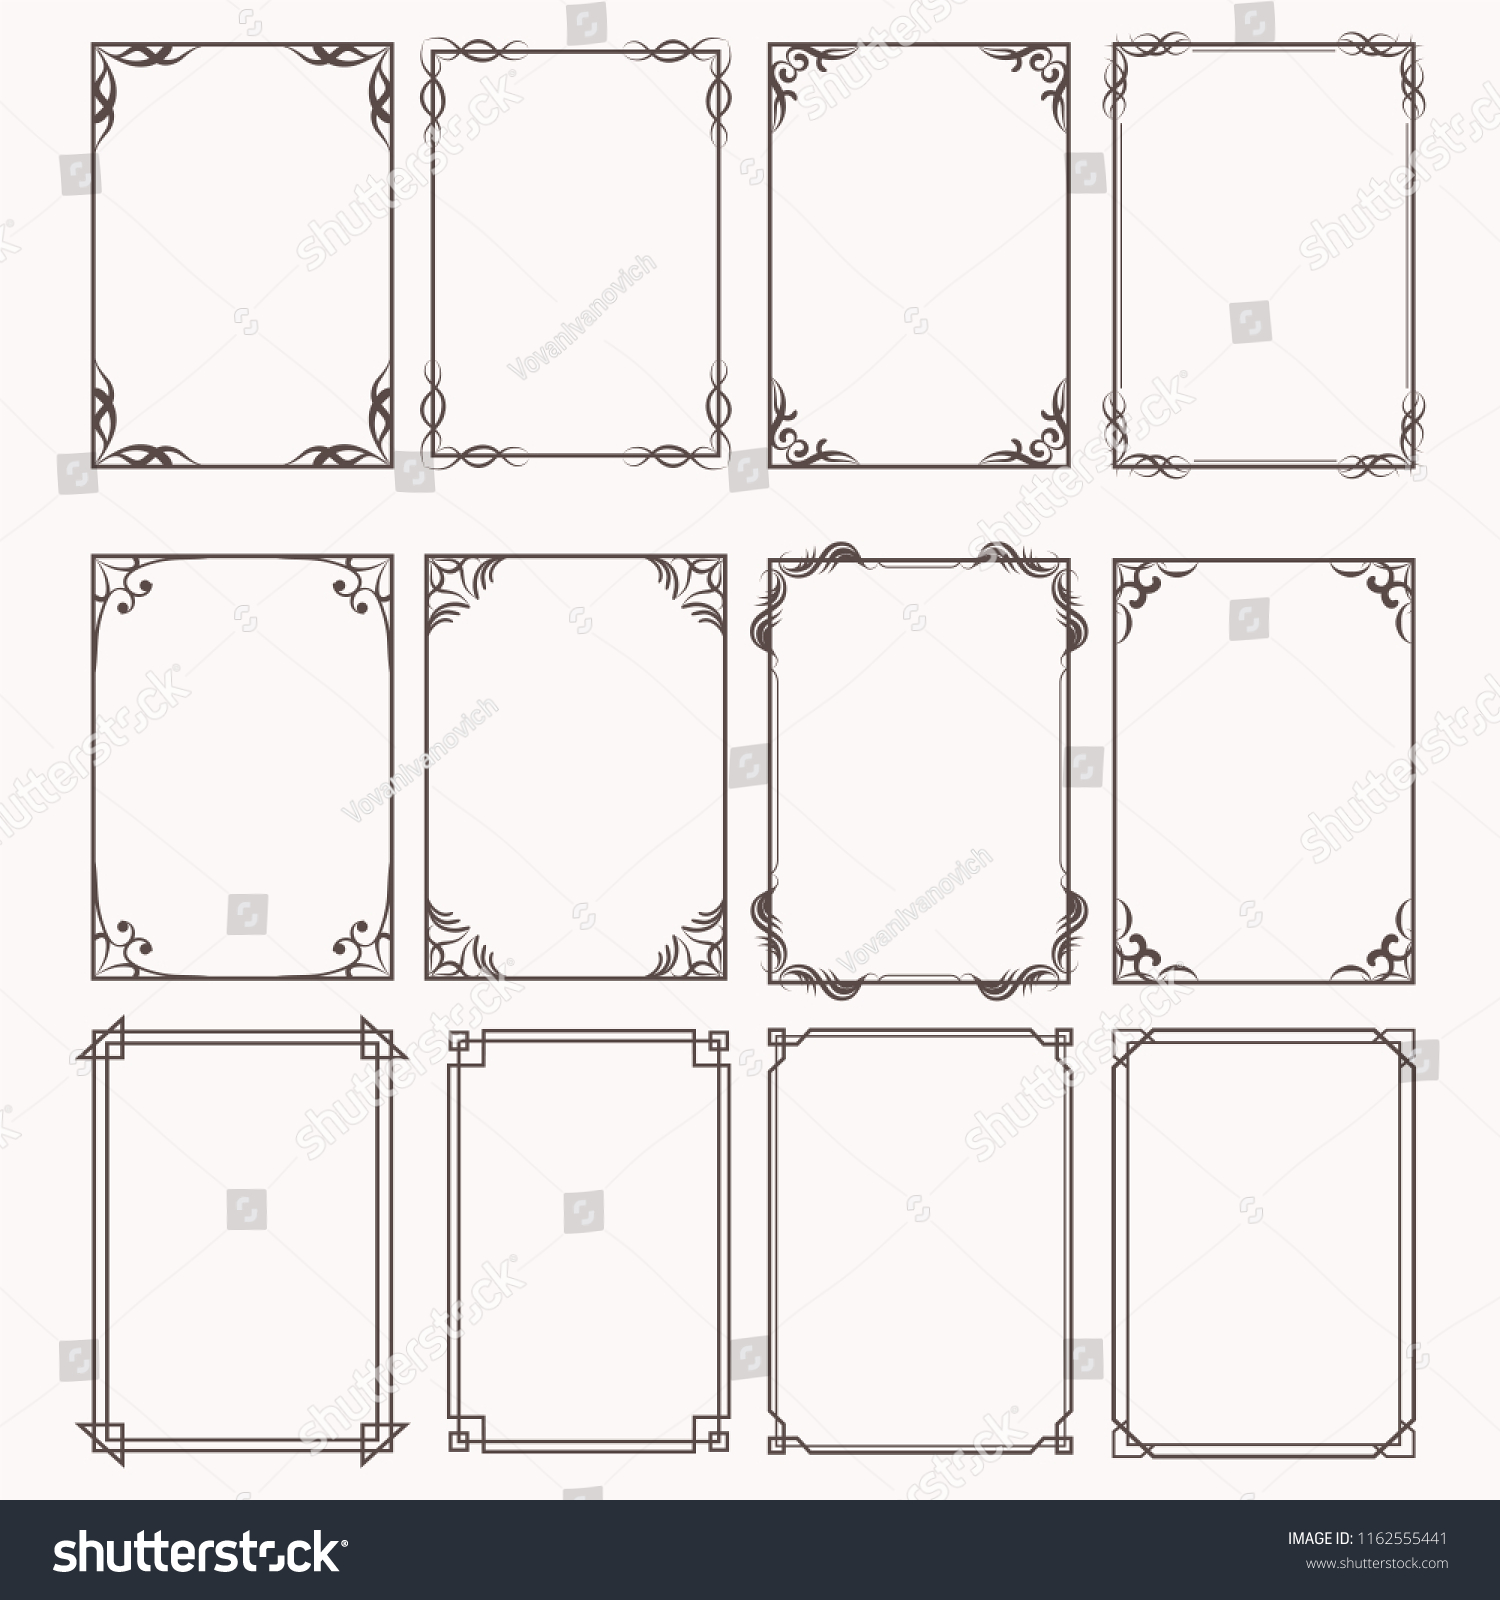 Decorative frames and borders rectangle proportions set #1162555441